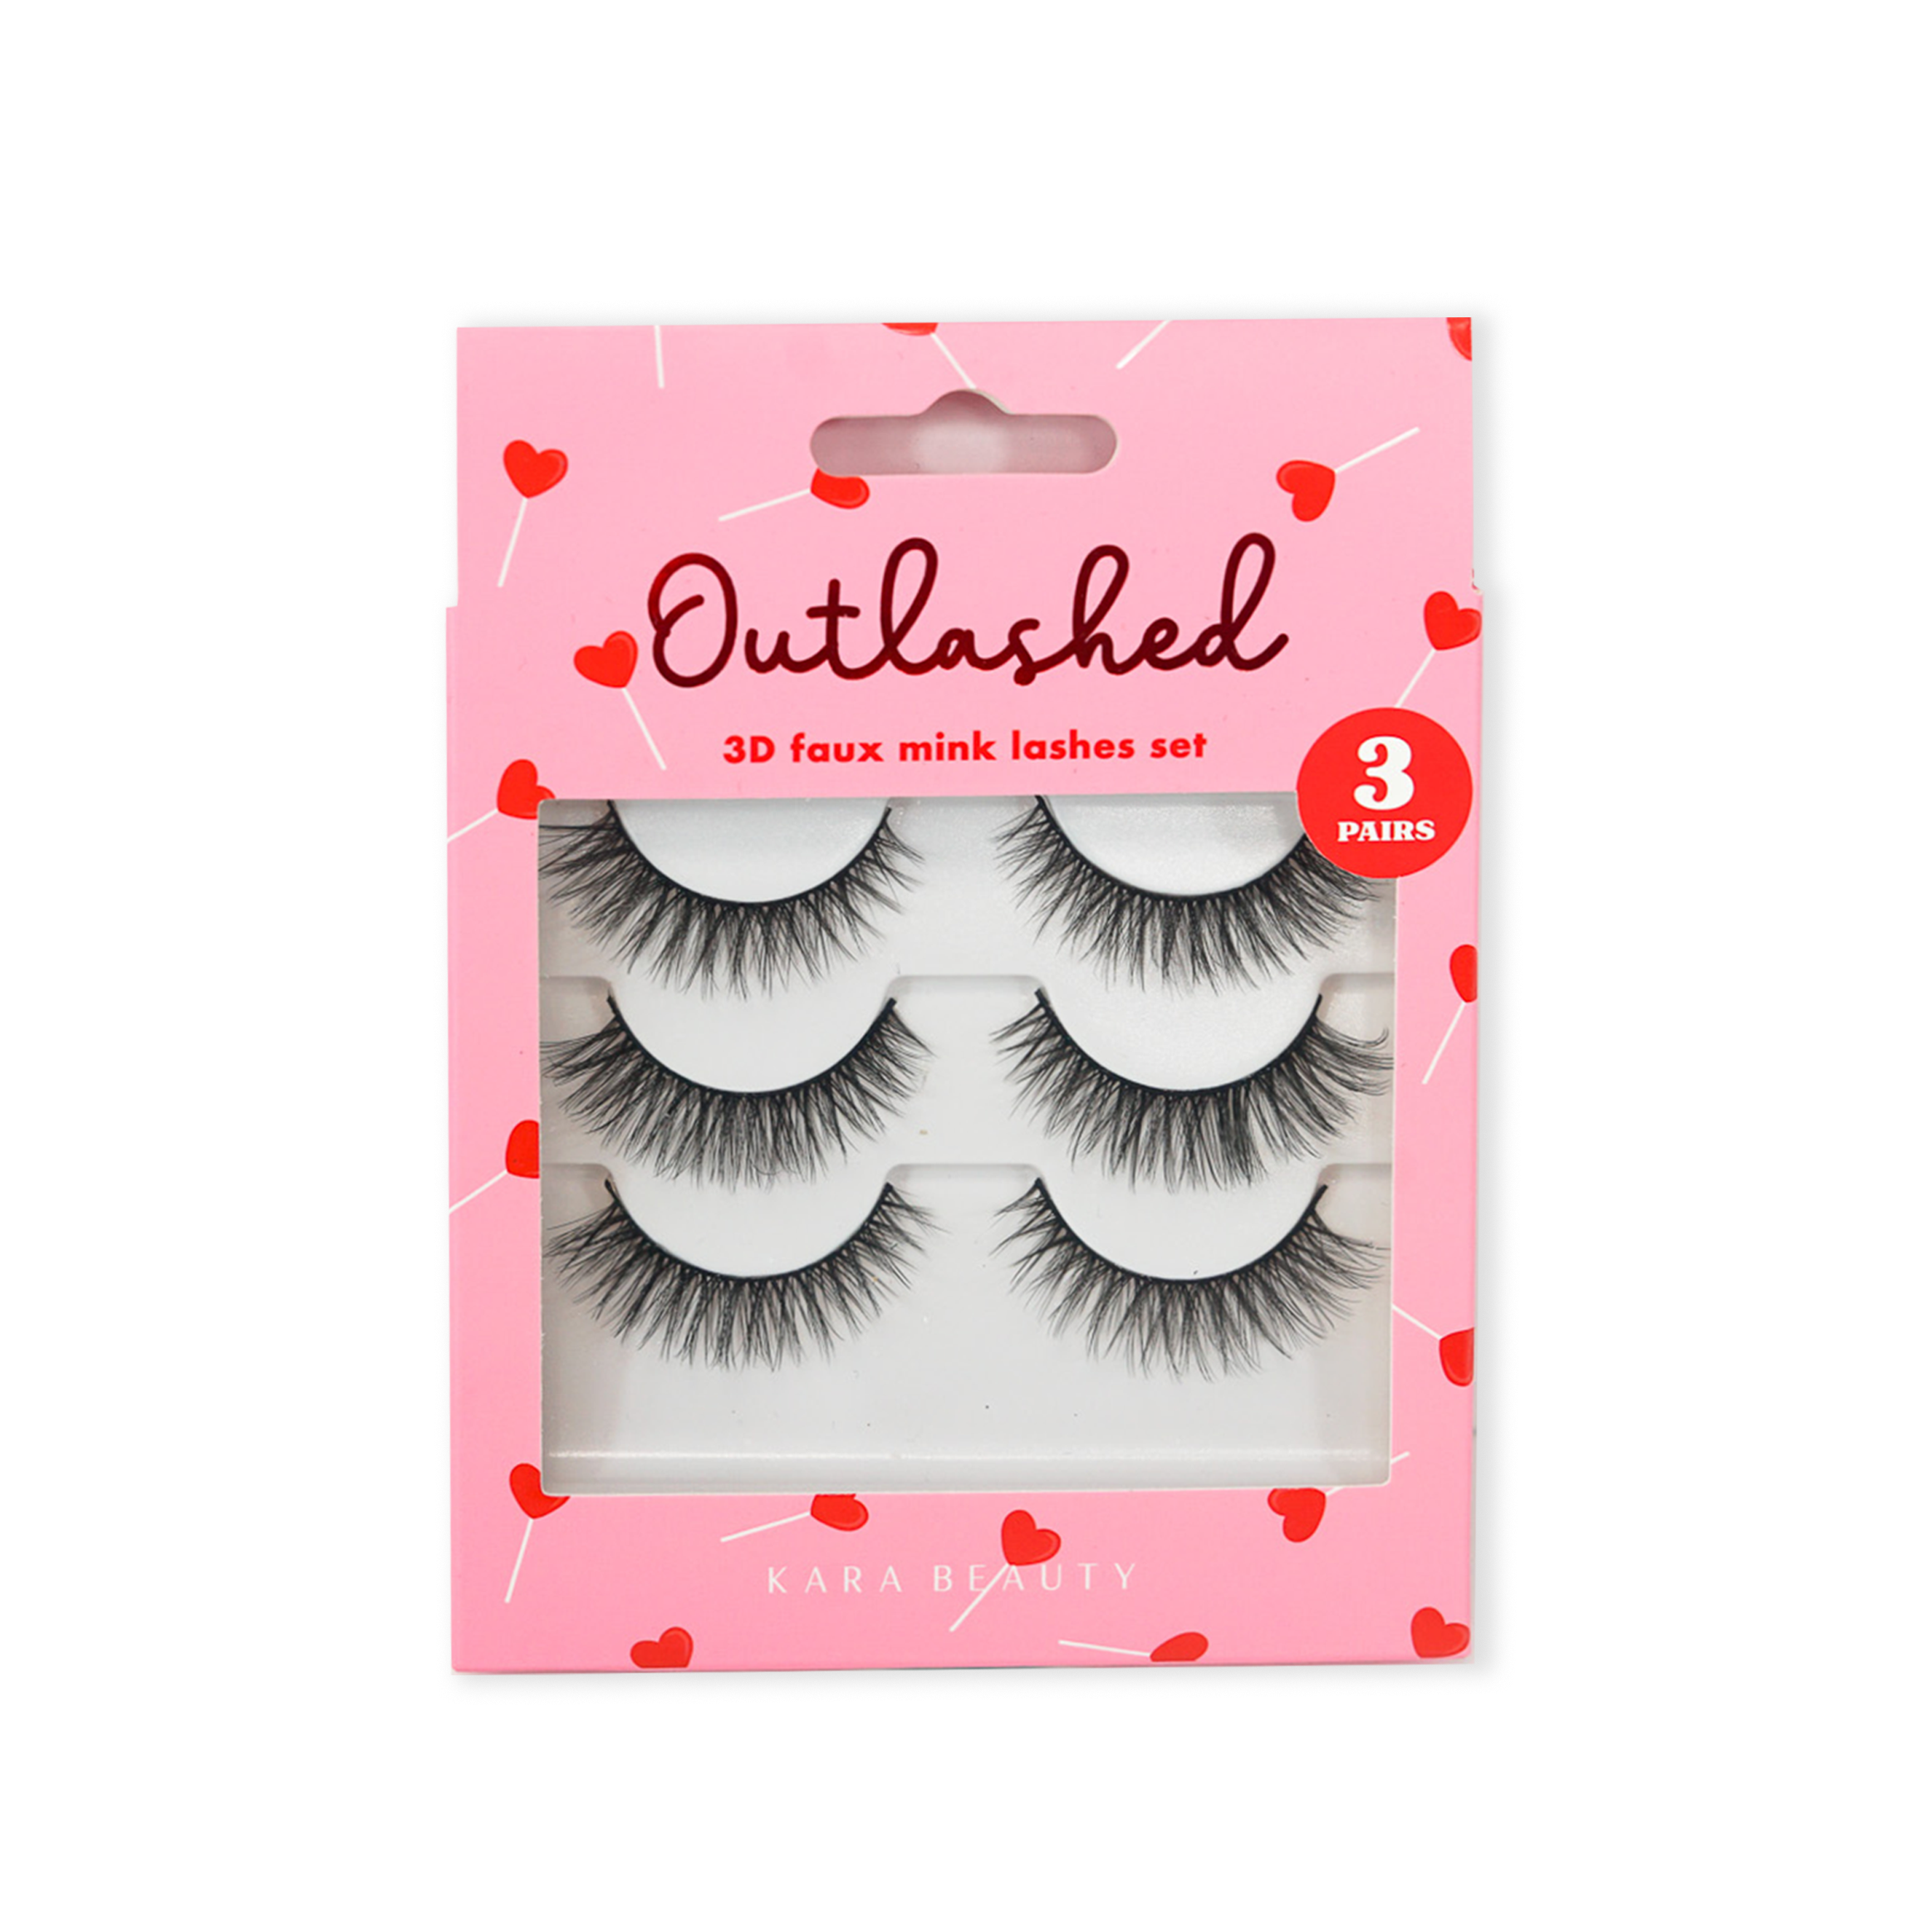 LV3012 OUTLASHED 3D Faux Mink Lashes 3 PAIRS